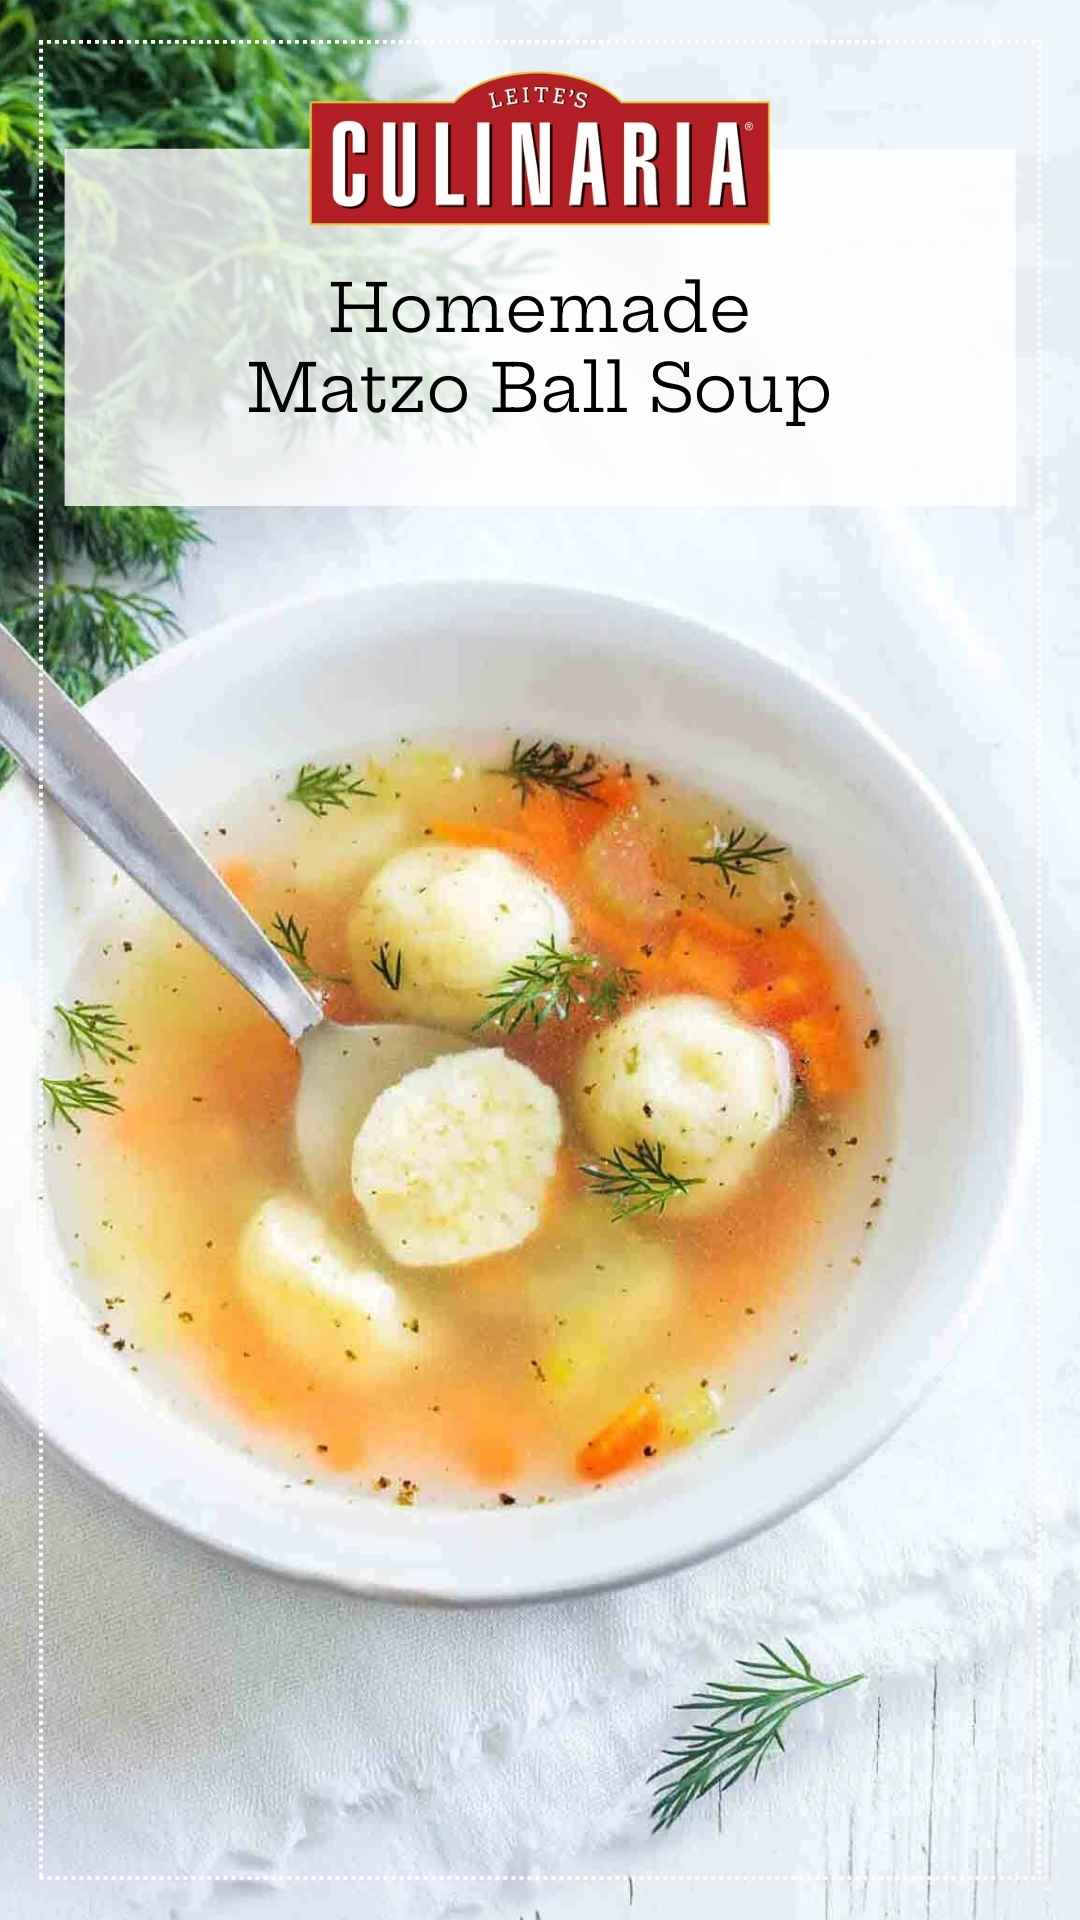 A bowl filled with matzo ball soup, garnished with fresh dill, and a spoon resting inside.